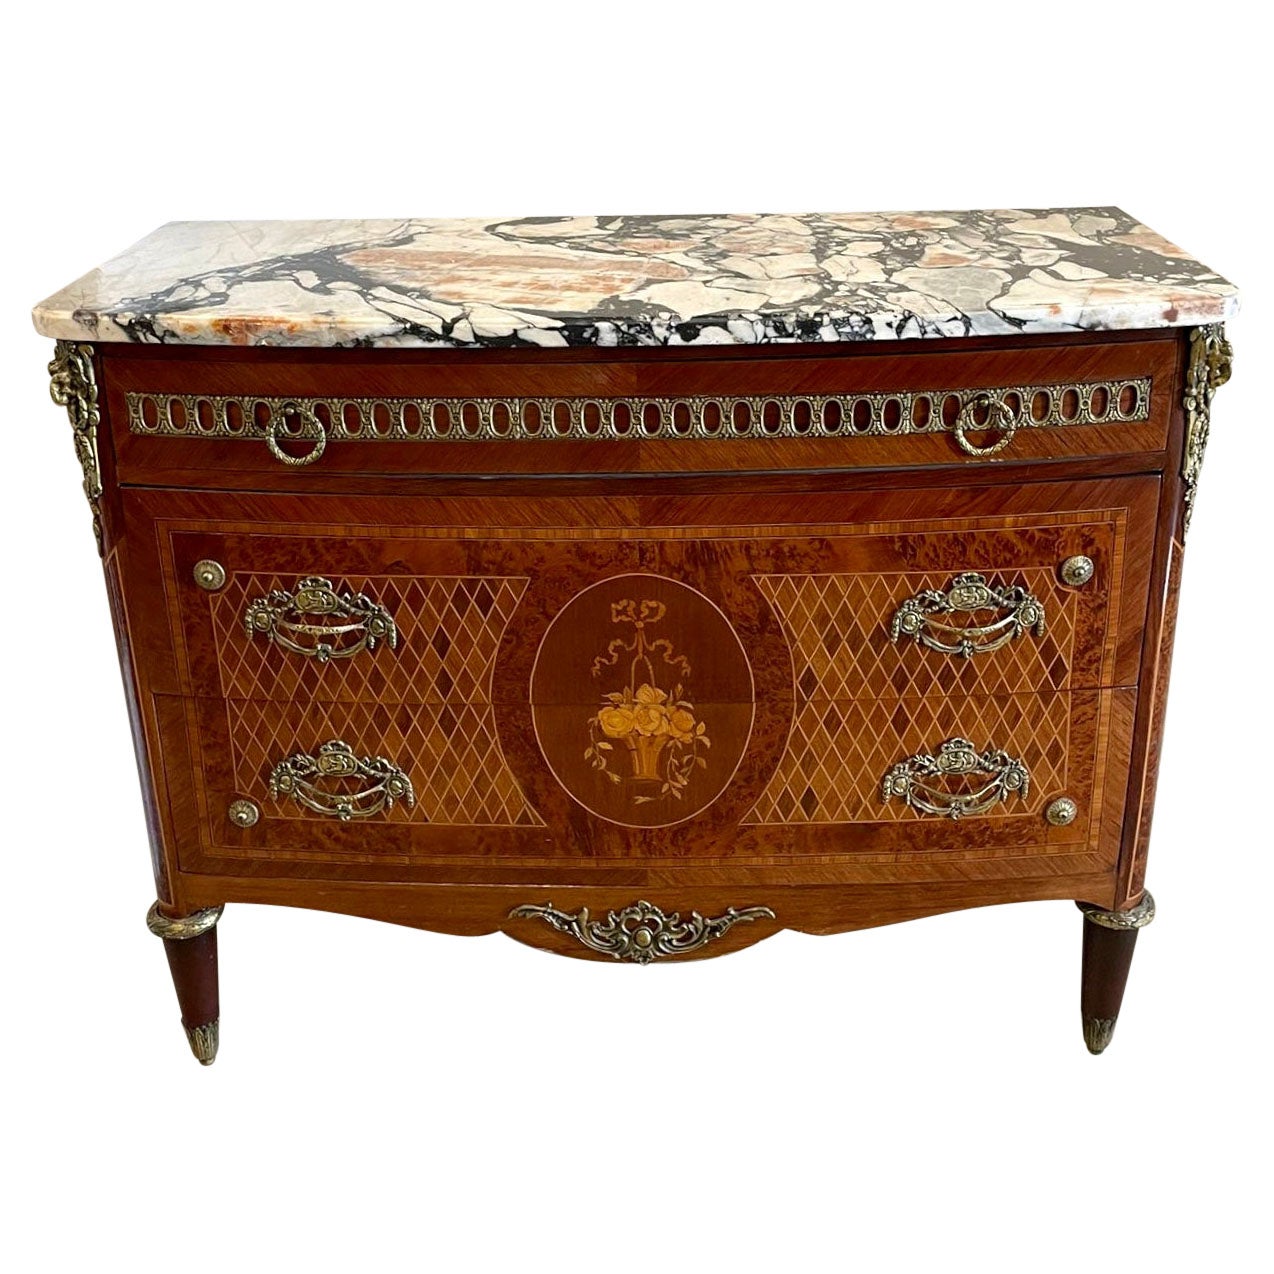 Antique Kingwood and Marquetry Inlaid Marble Top Commode/Chest of Drawers For Sale